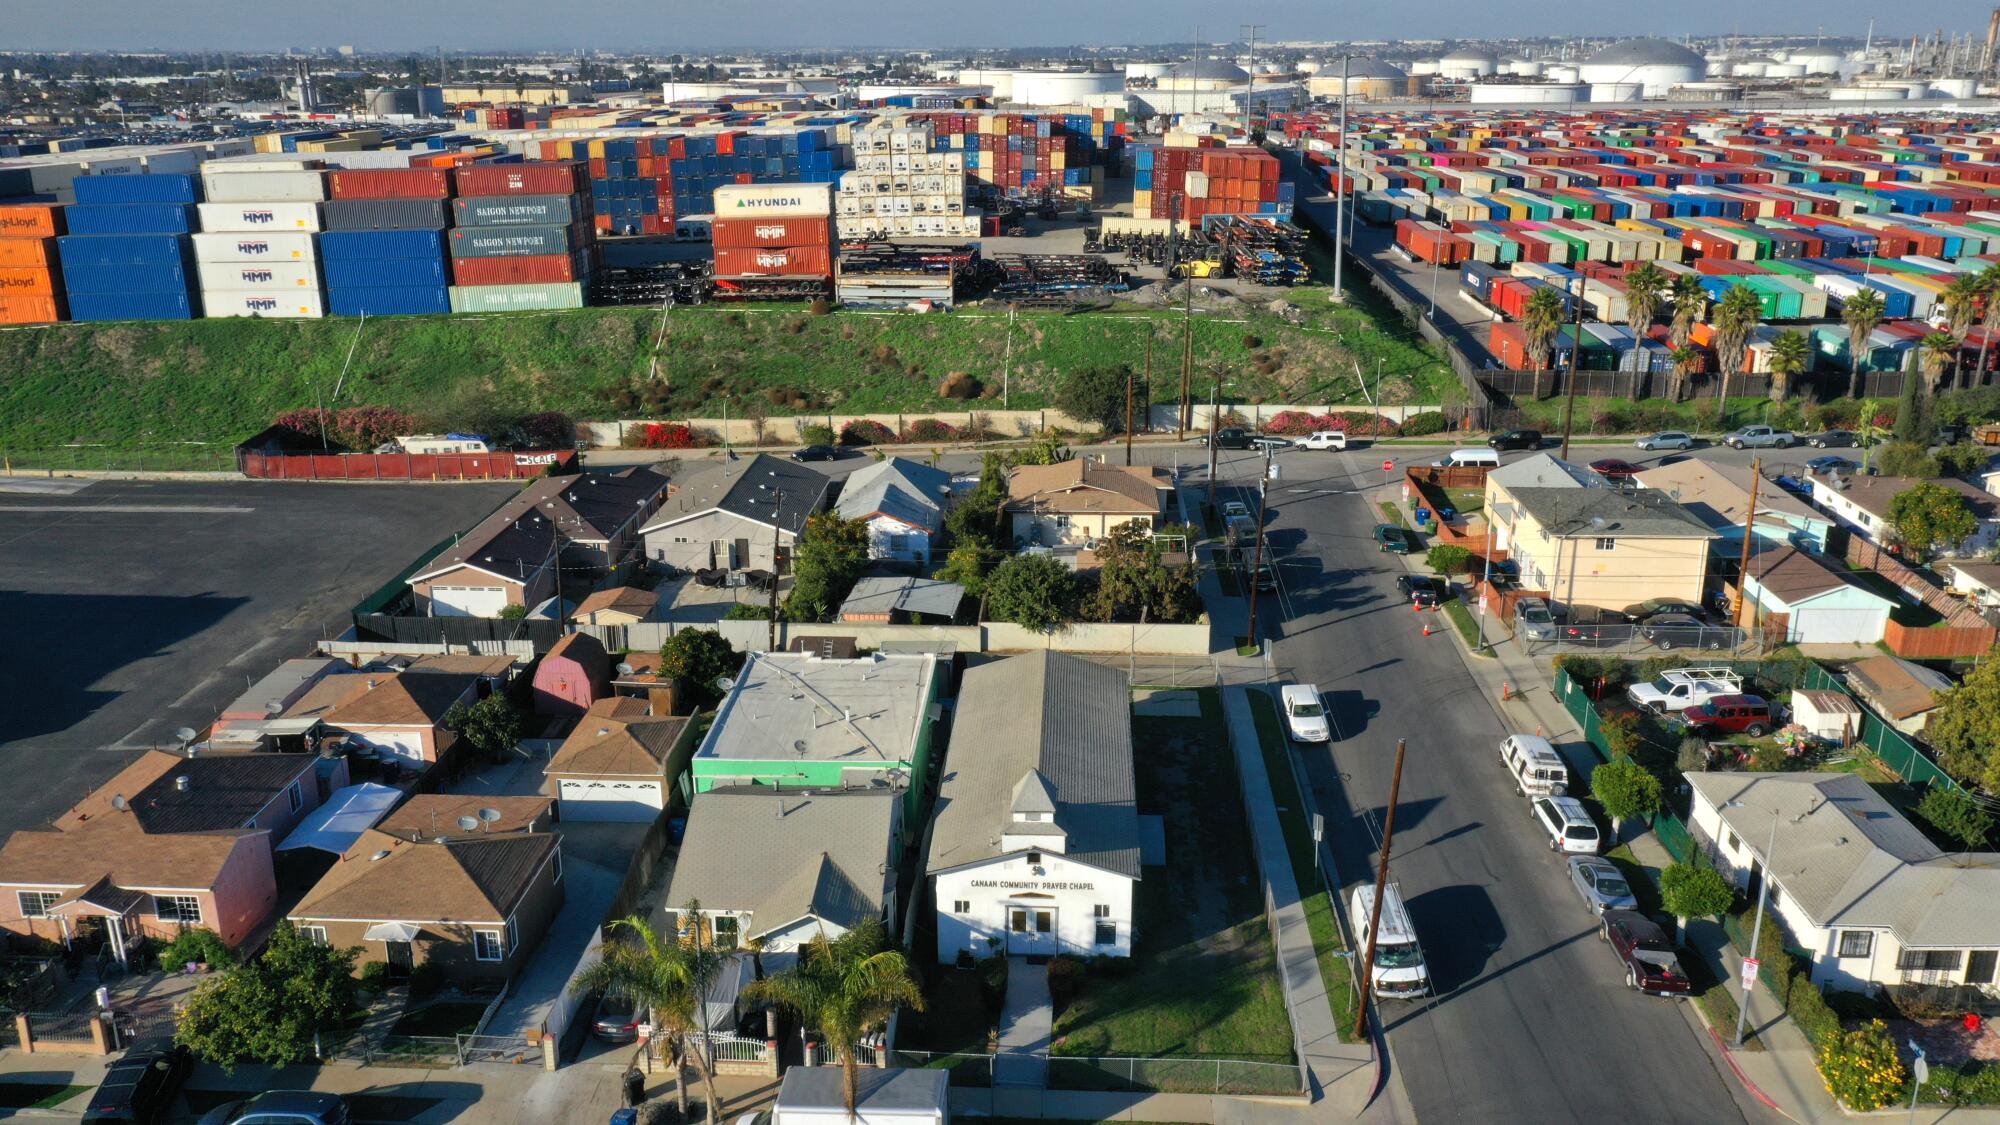 This Wilmington neighborhood is surrounded by container storage lots.